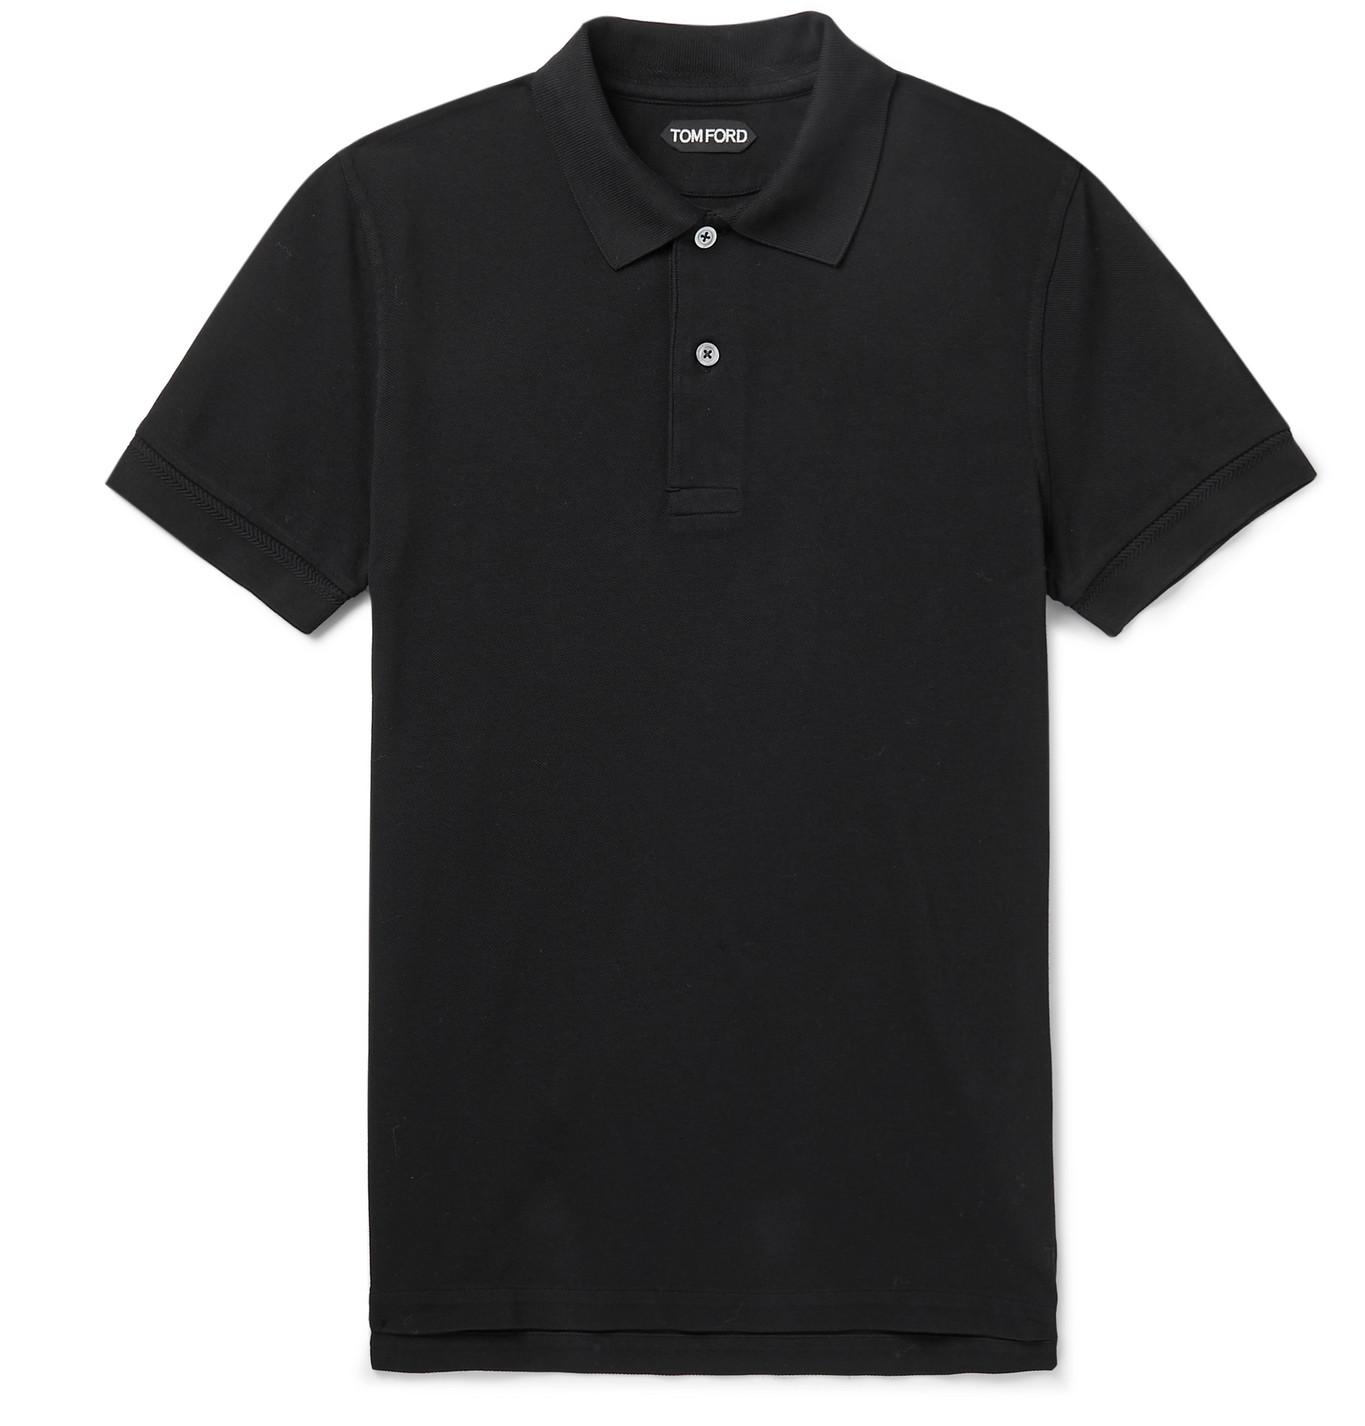 Tom Ford Slim-fit Cotton-piqué Polo Shirt in Black for Men - Lyst